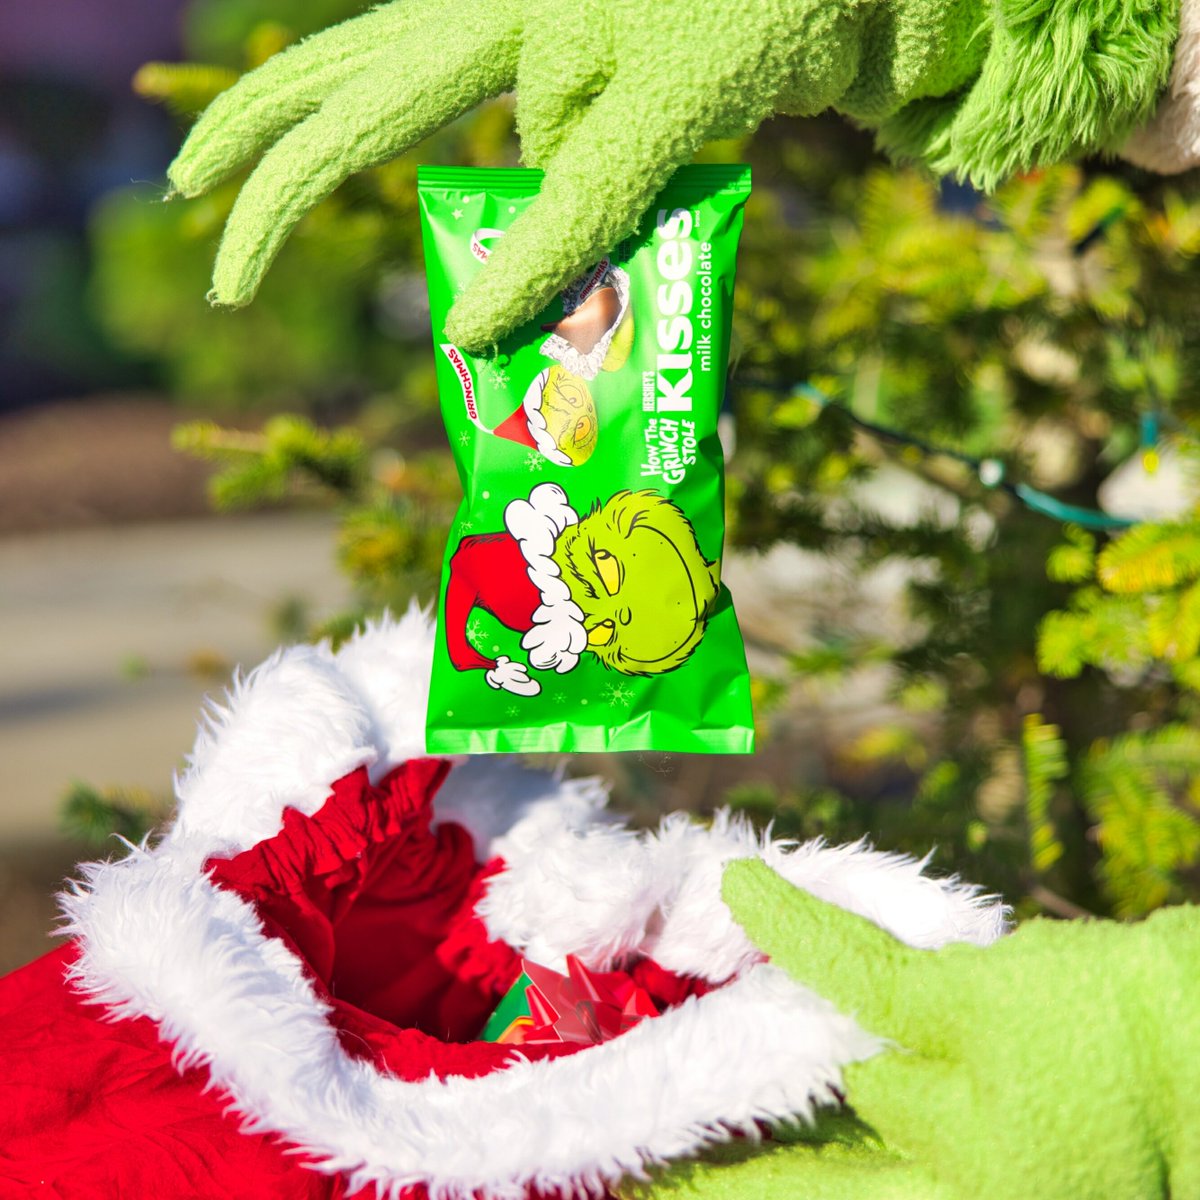 HERSHEY'S KISSES have helped the Grinch's heart grow three sizes! Reply with #GrinchKisses #Sweepstakes and the Grinch may just gift you FREE bags of his new favorite treat! NO PURCH. NEC. Ends 12/8/21. 18+ (19 AL/NE, 21 MS). For Official Rules, visit bit.ly/3B1TZZk